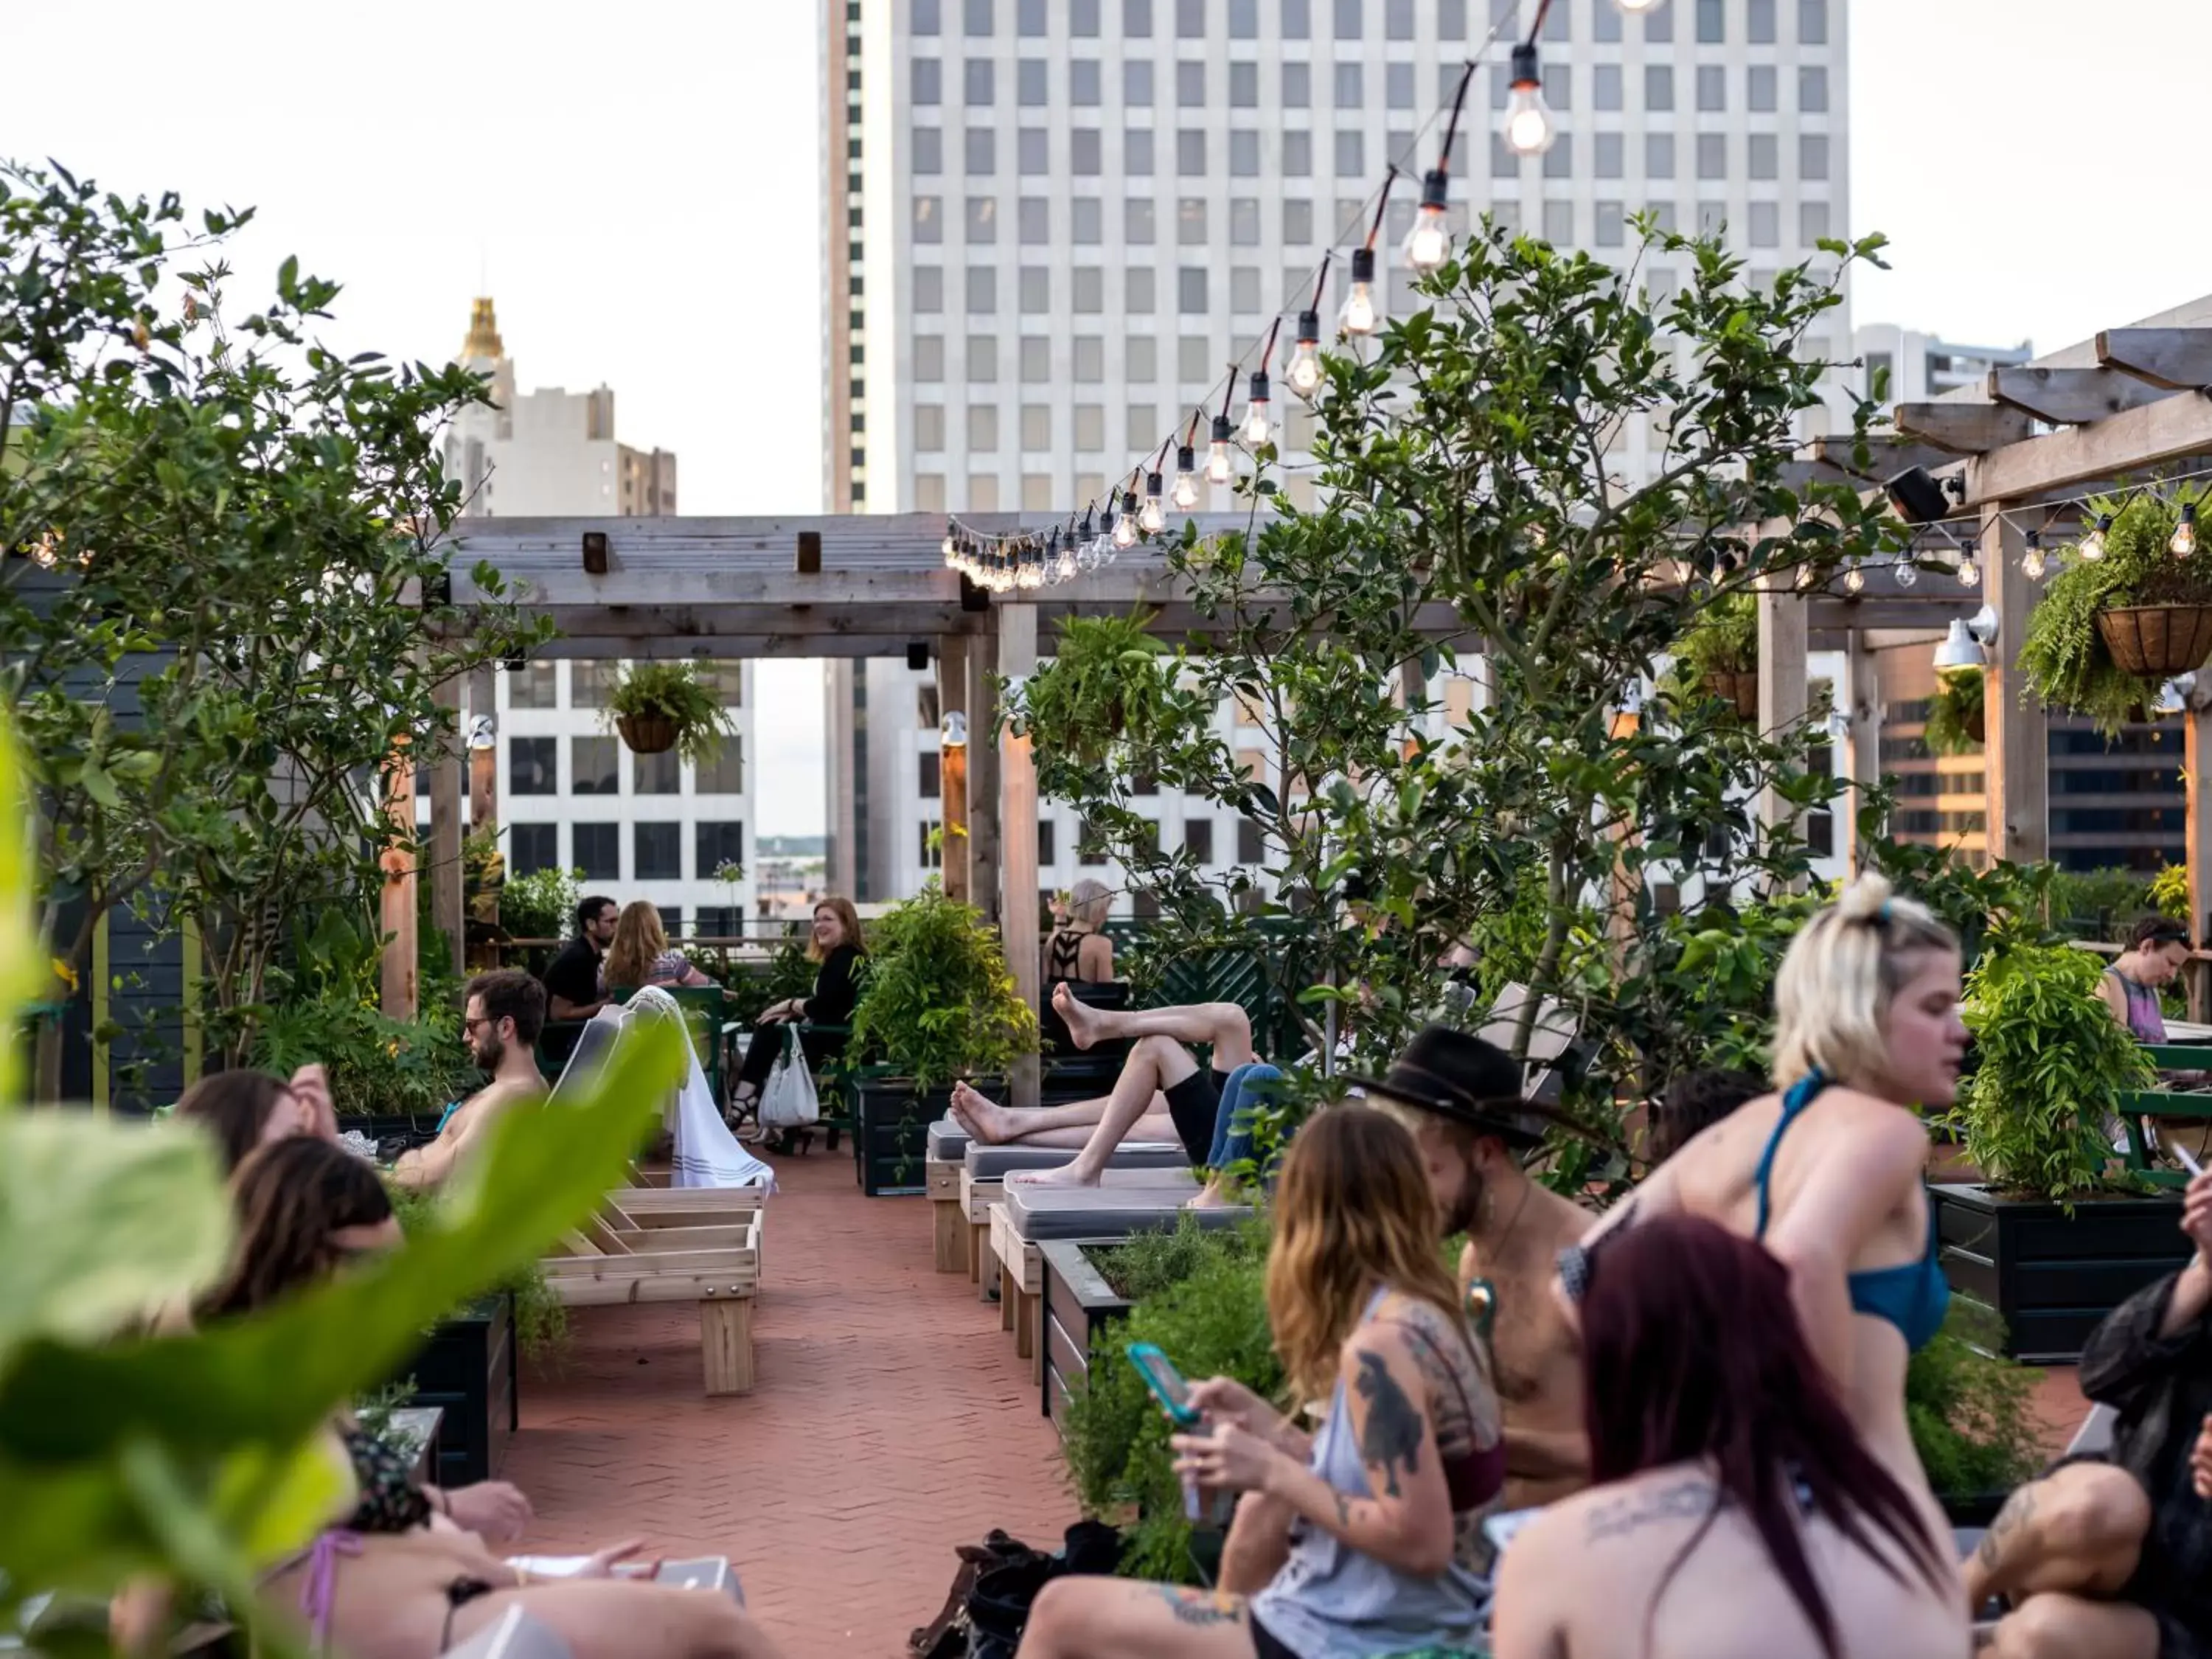 Area and facilities in Ace Hotel New Orleans